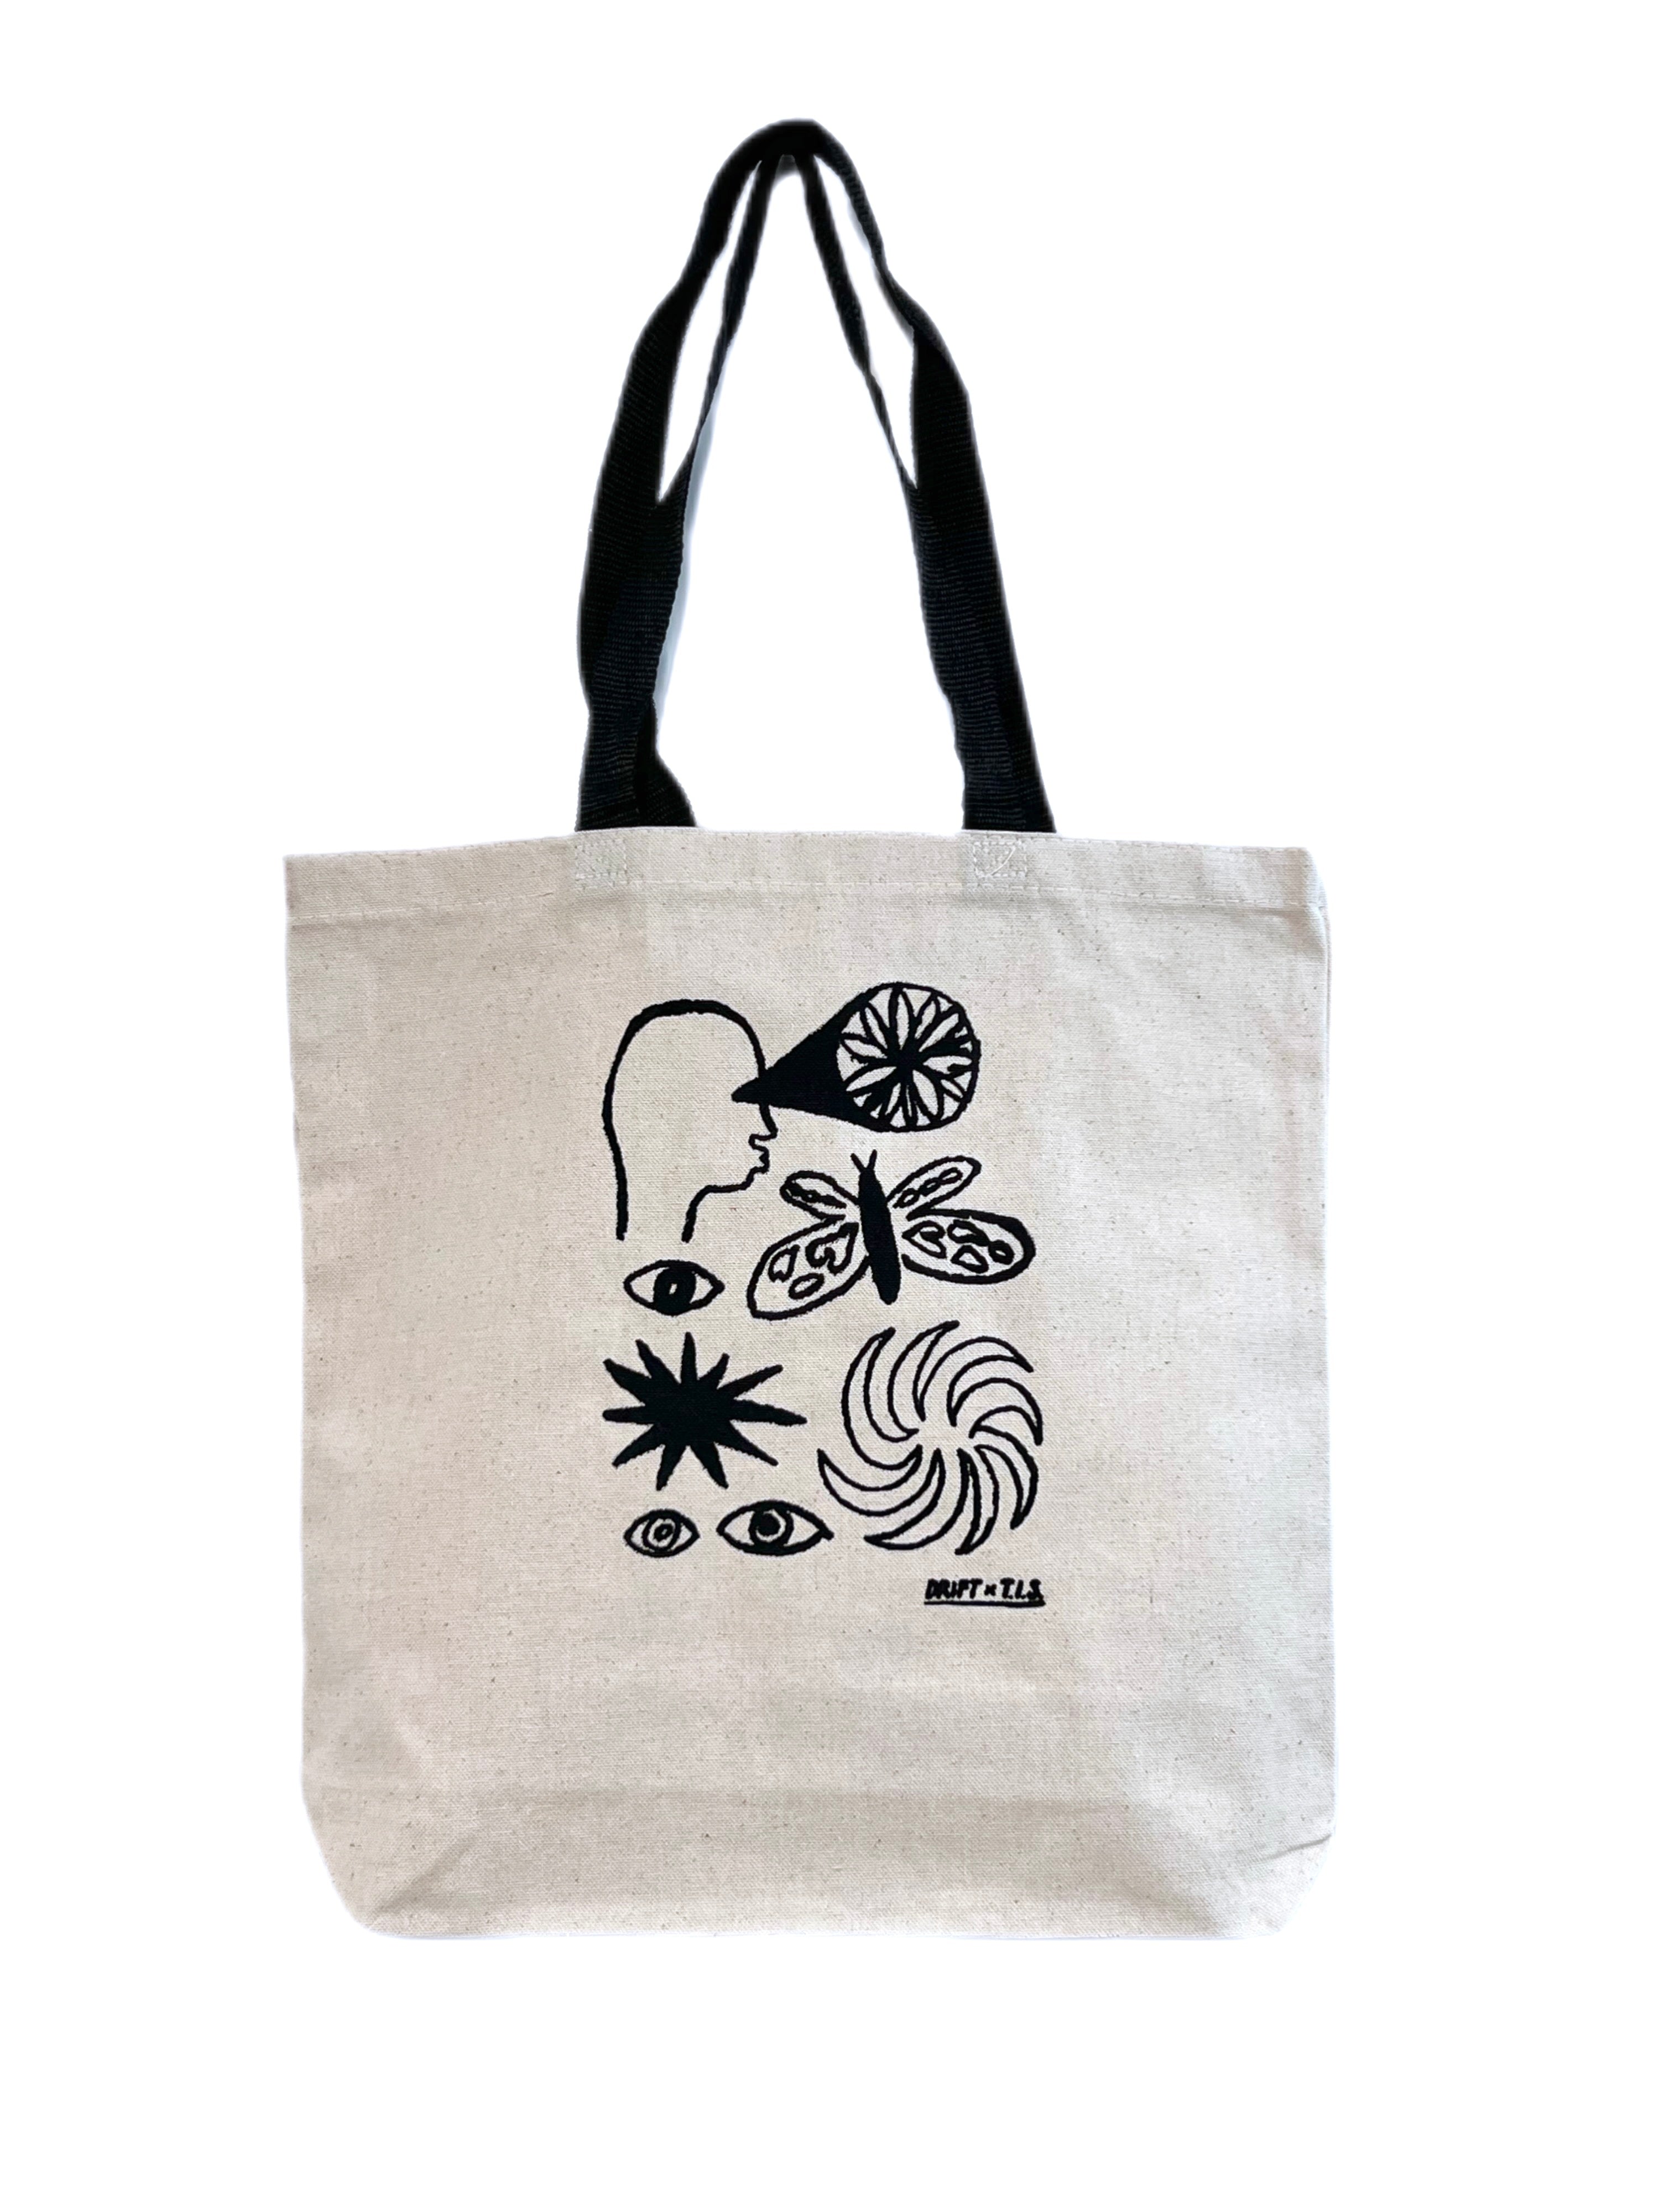 FLWR VISION TOTE